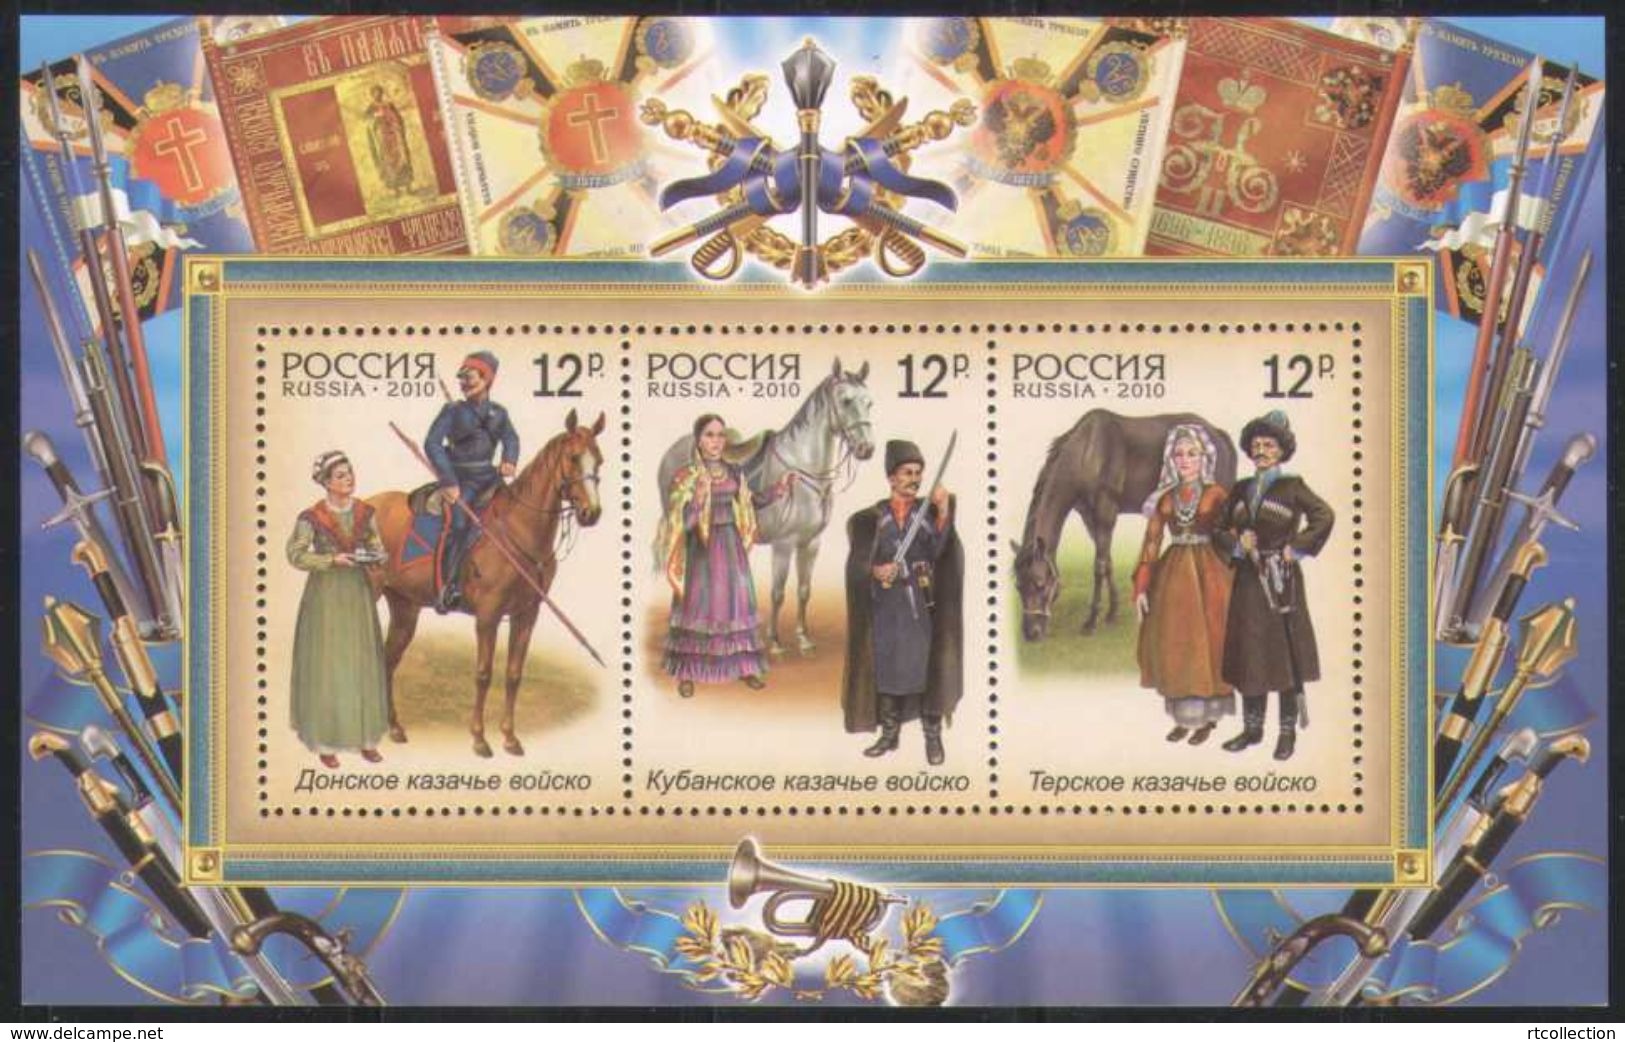 Russia 2010 History Cossacks Solider People Places Horse Cultures Costumes Military Army S/S Stamps MNH Mi BL138 Sc#7232 - Militaria